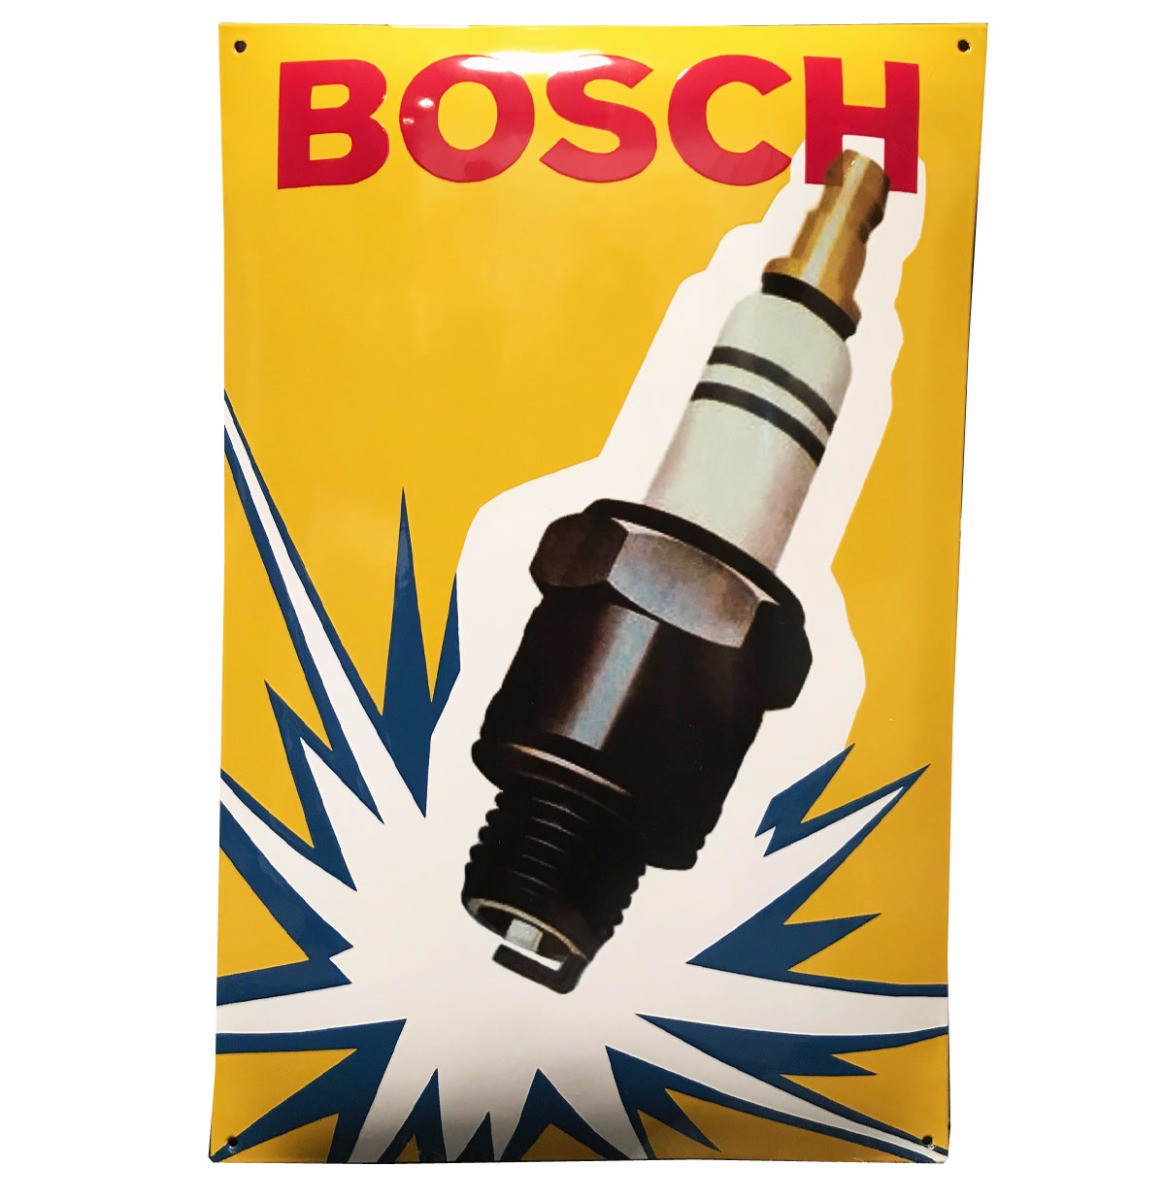 Bosch Spark Plug Bougies Emaille Bord 60 x 40 cm